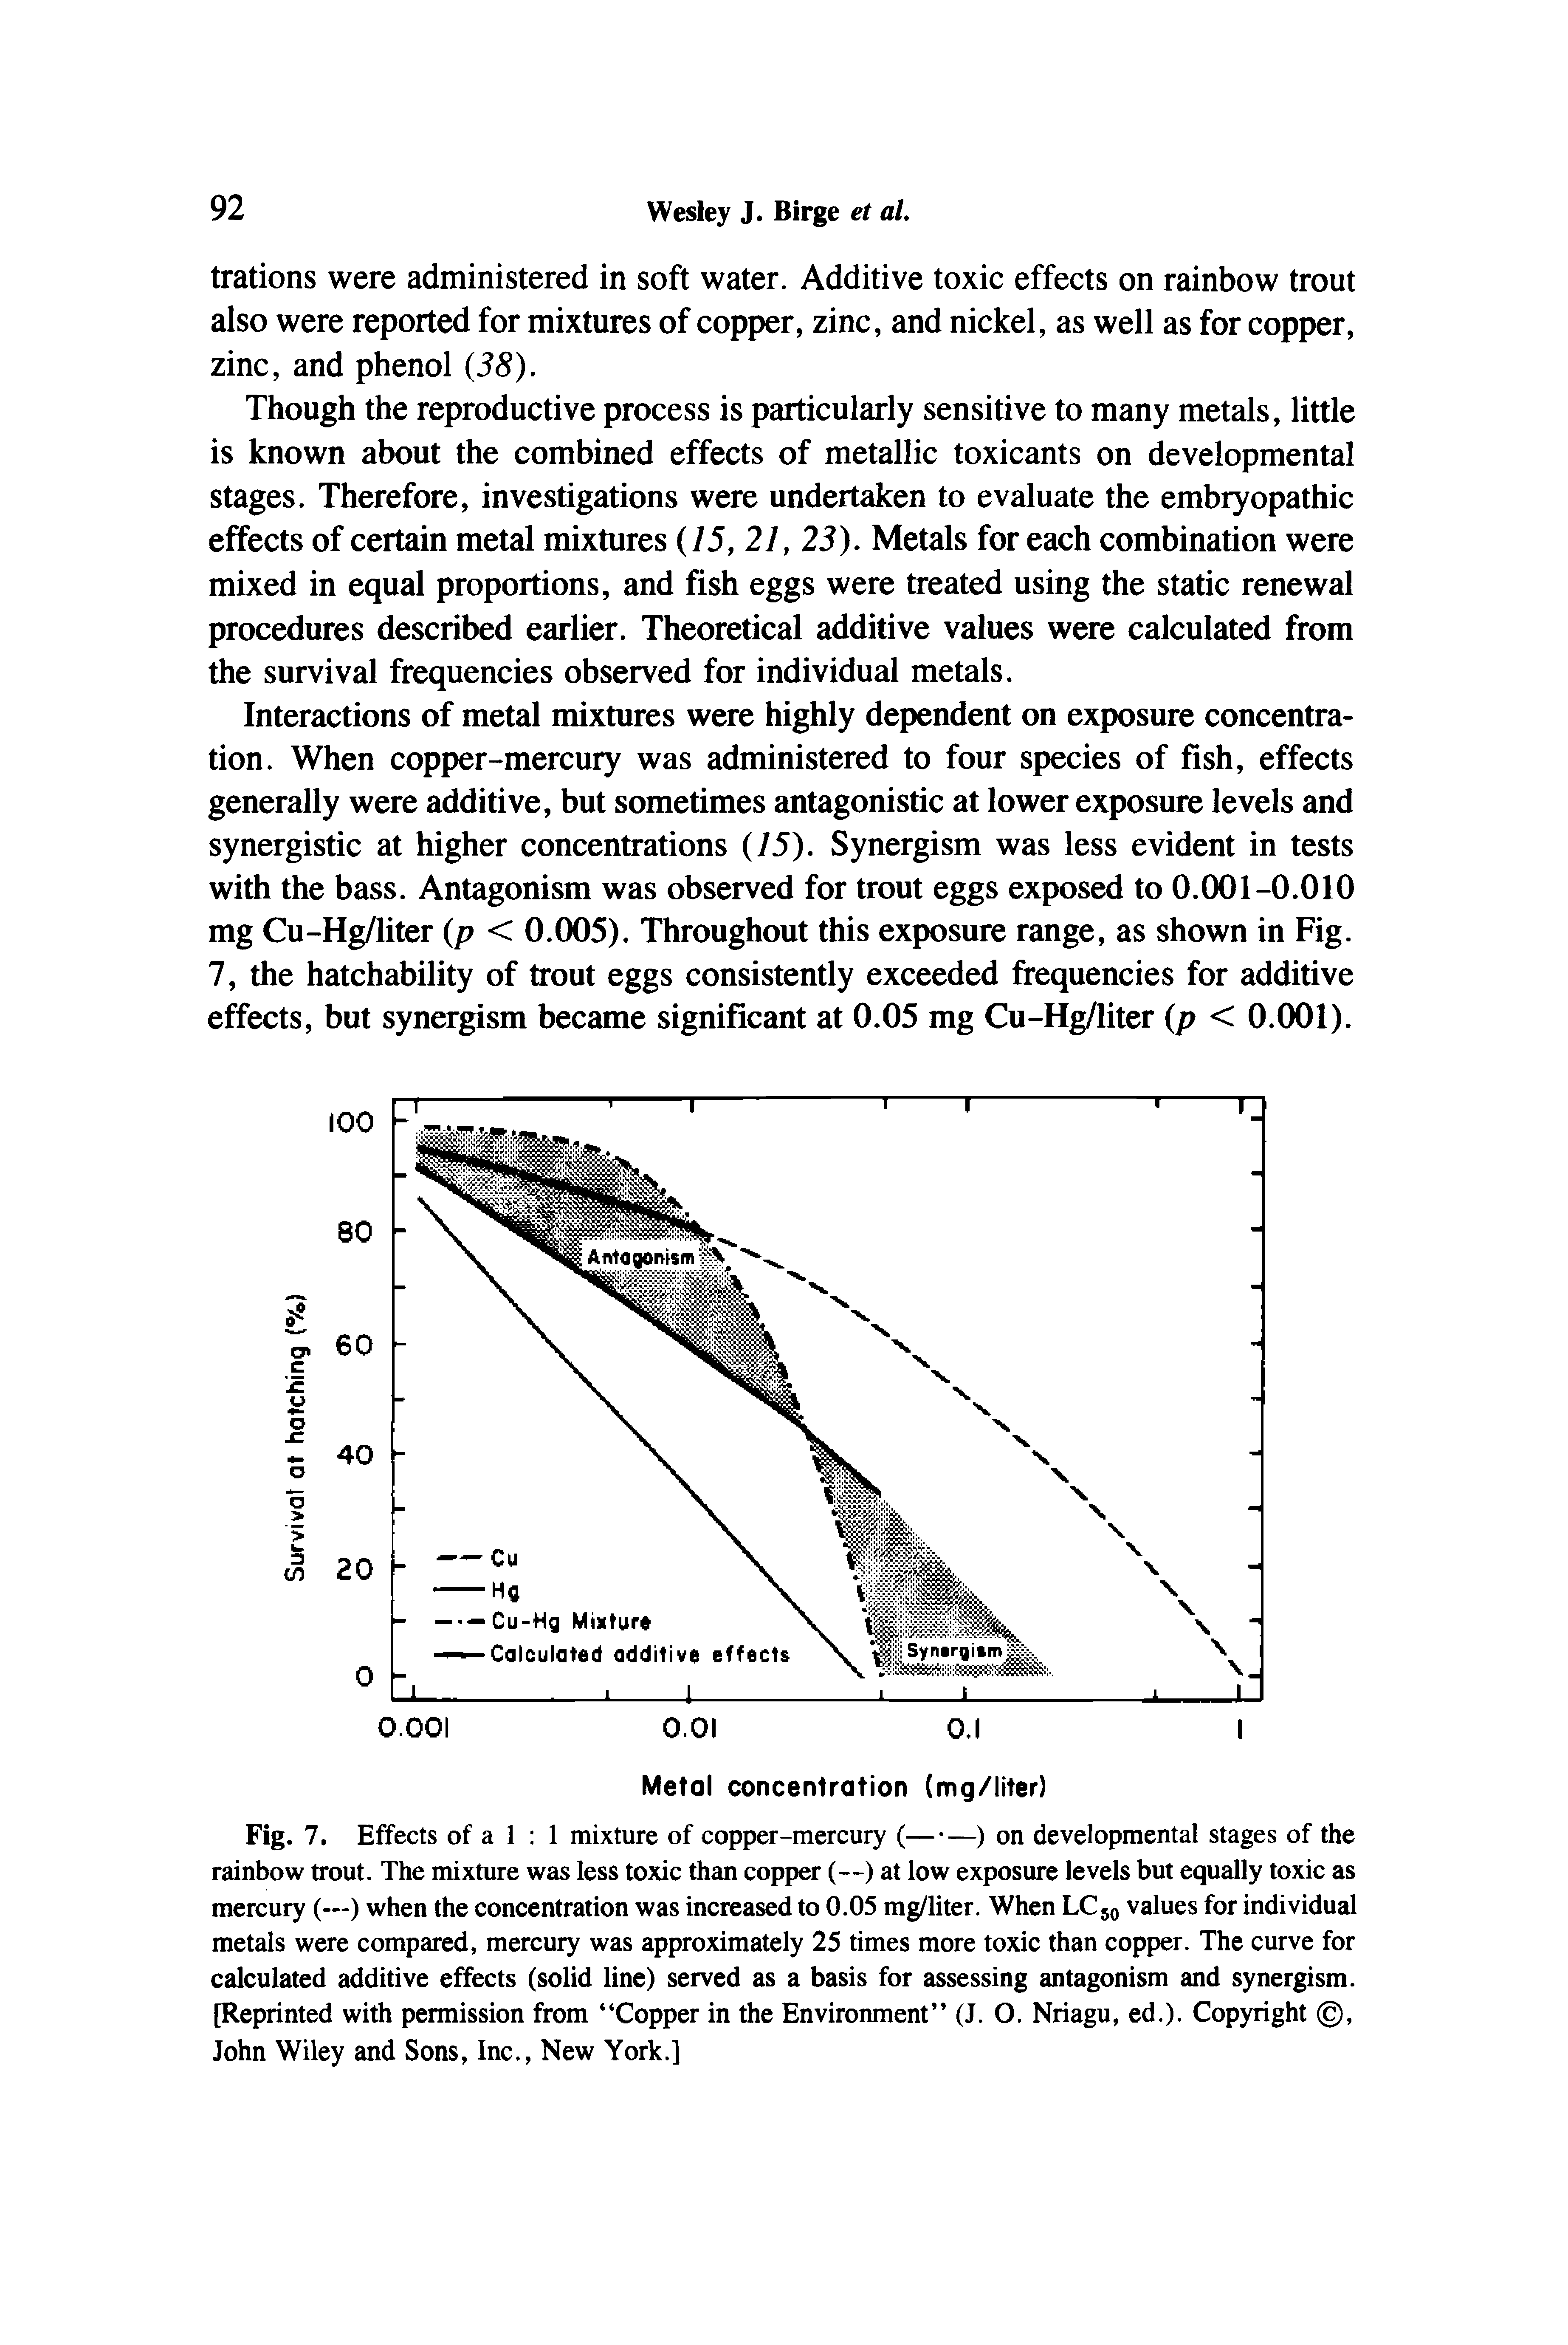 Fig. 7, Effects of a 1 1 mixture of copper-mercury (— —) on developmental stages of the rainbow trout. The mixture was less toxic than copper (—) at low exposure levels but equally toxic as mercury (—) when the concentration was increased to 0.05 mg/liter. When LCjo values for individual metals were compared, mercury was approximately 25 times more toxic than copper. The curve for calculated additive effects (solid line) served as a basis for assessing antagonism and synergism. [Reprinted with permission from Copper in the Environment (J. O. Nriagu, ed.). Copyright , John Wiley and Sons, Inc., New York.]...